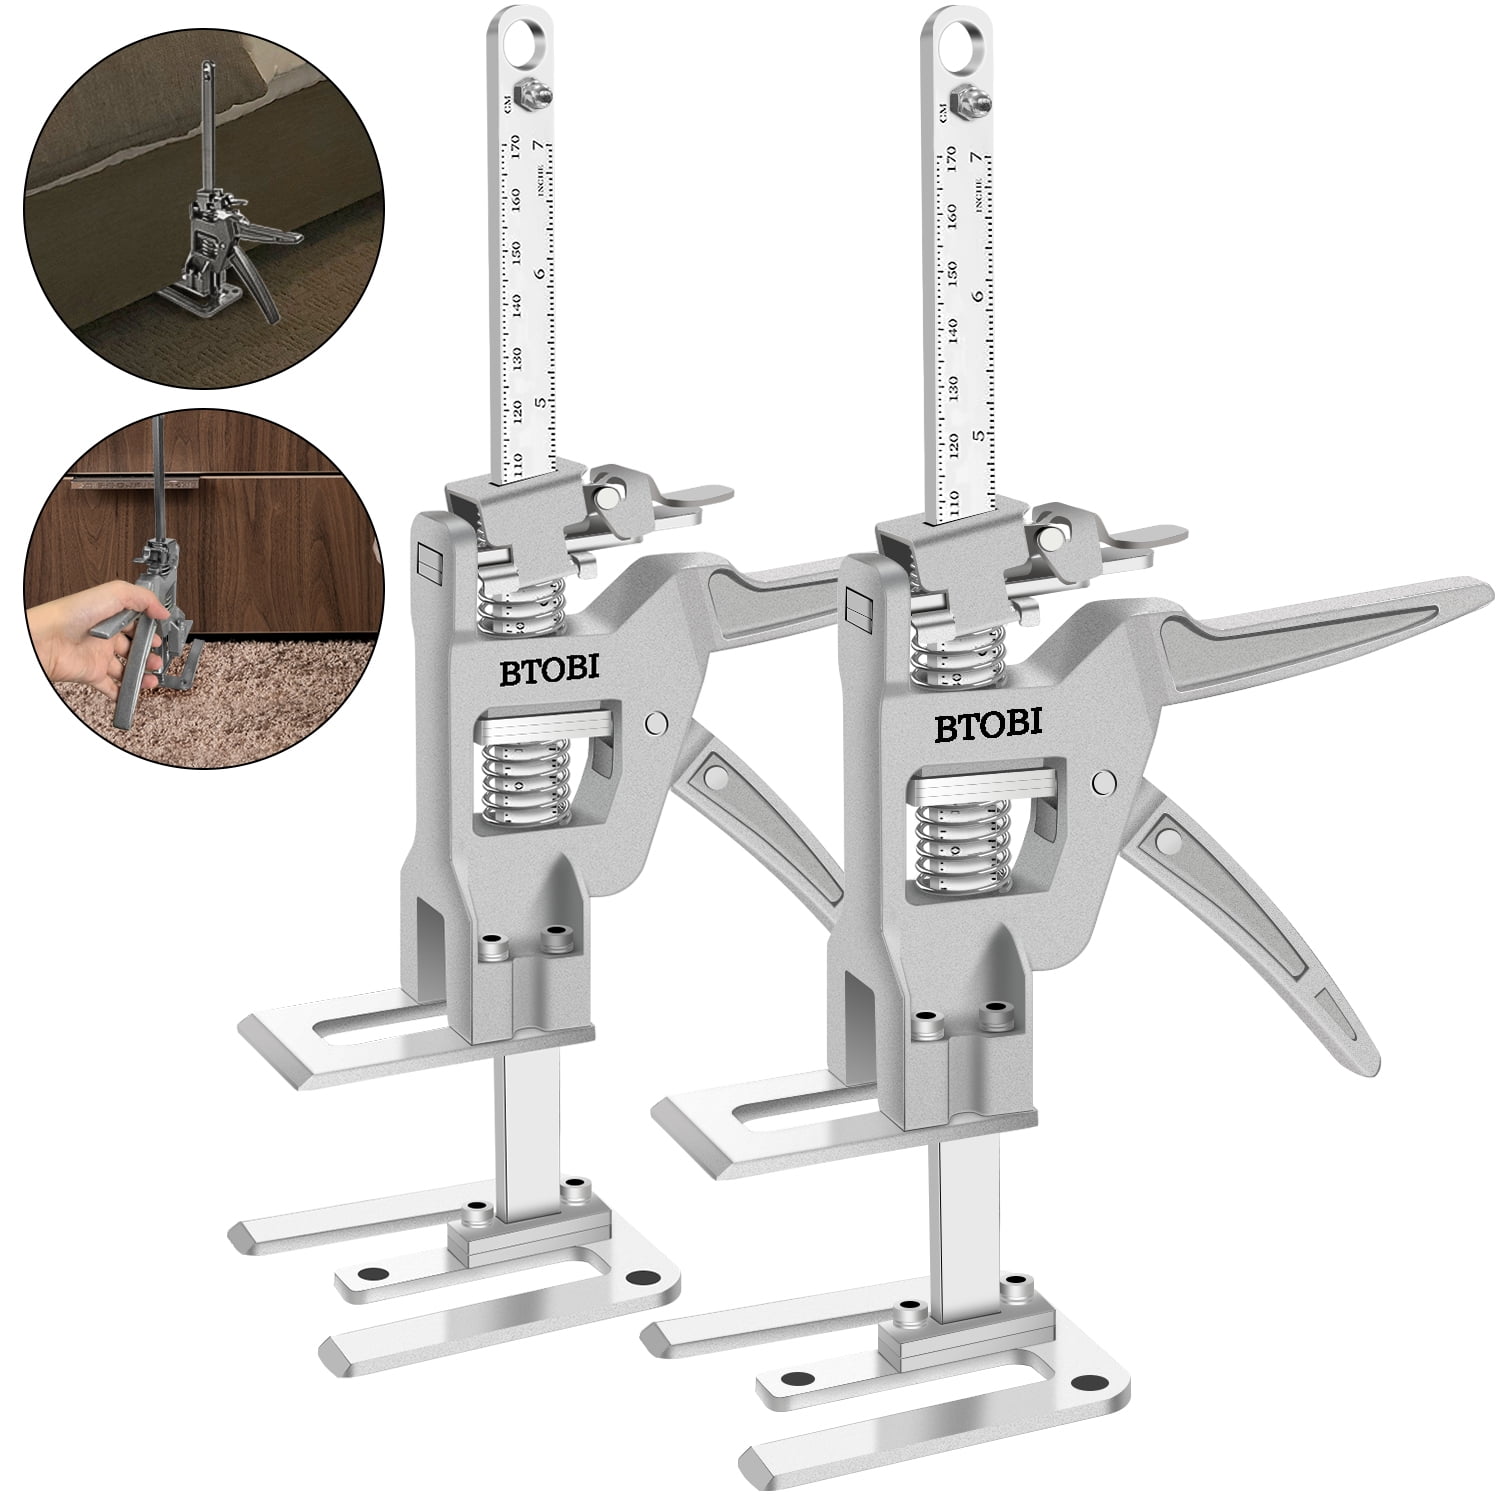  Jinzaaly 2 Packs Hand Lifting Tool Jack, Labor-Saving Arm Jack,  The Height Raised by 5-250mm, Up to 260kg/573 lbs, Board Lifter, Tile  Height Adjuster : Electronics